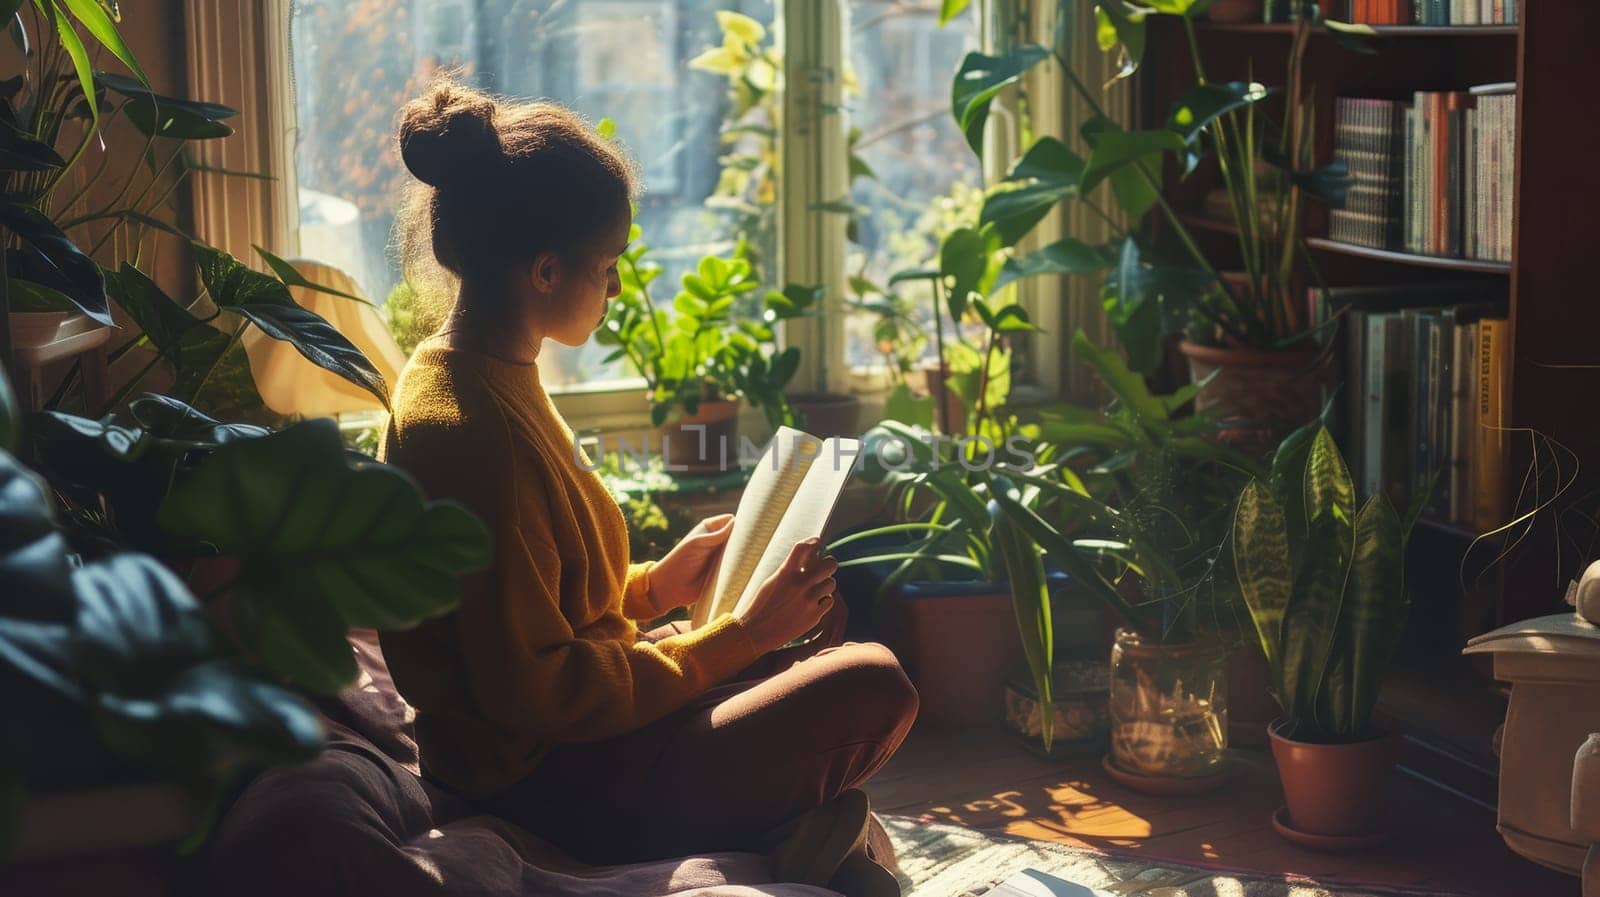 Young woman engrossed in a book, surrounded by the lush greenery of her sunny indoor garden. by sfinks